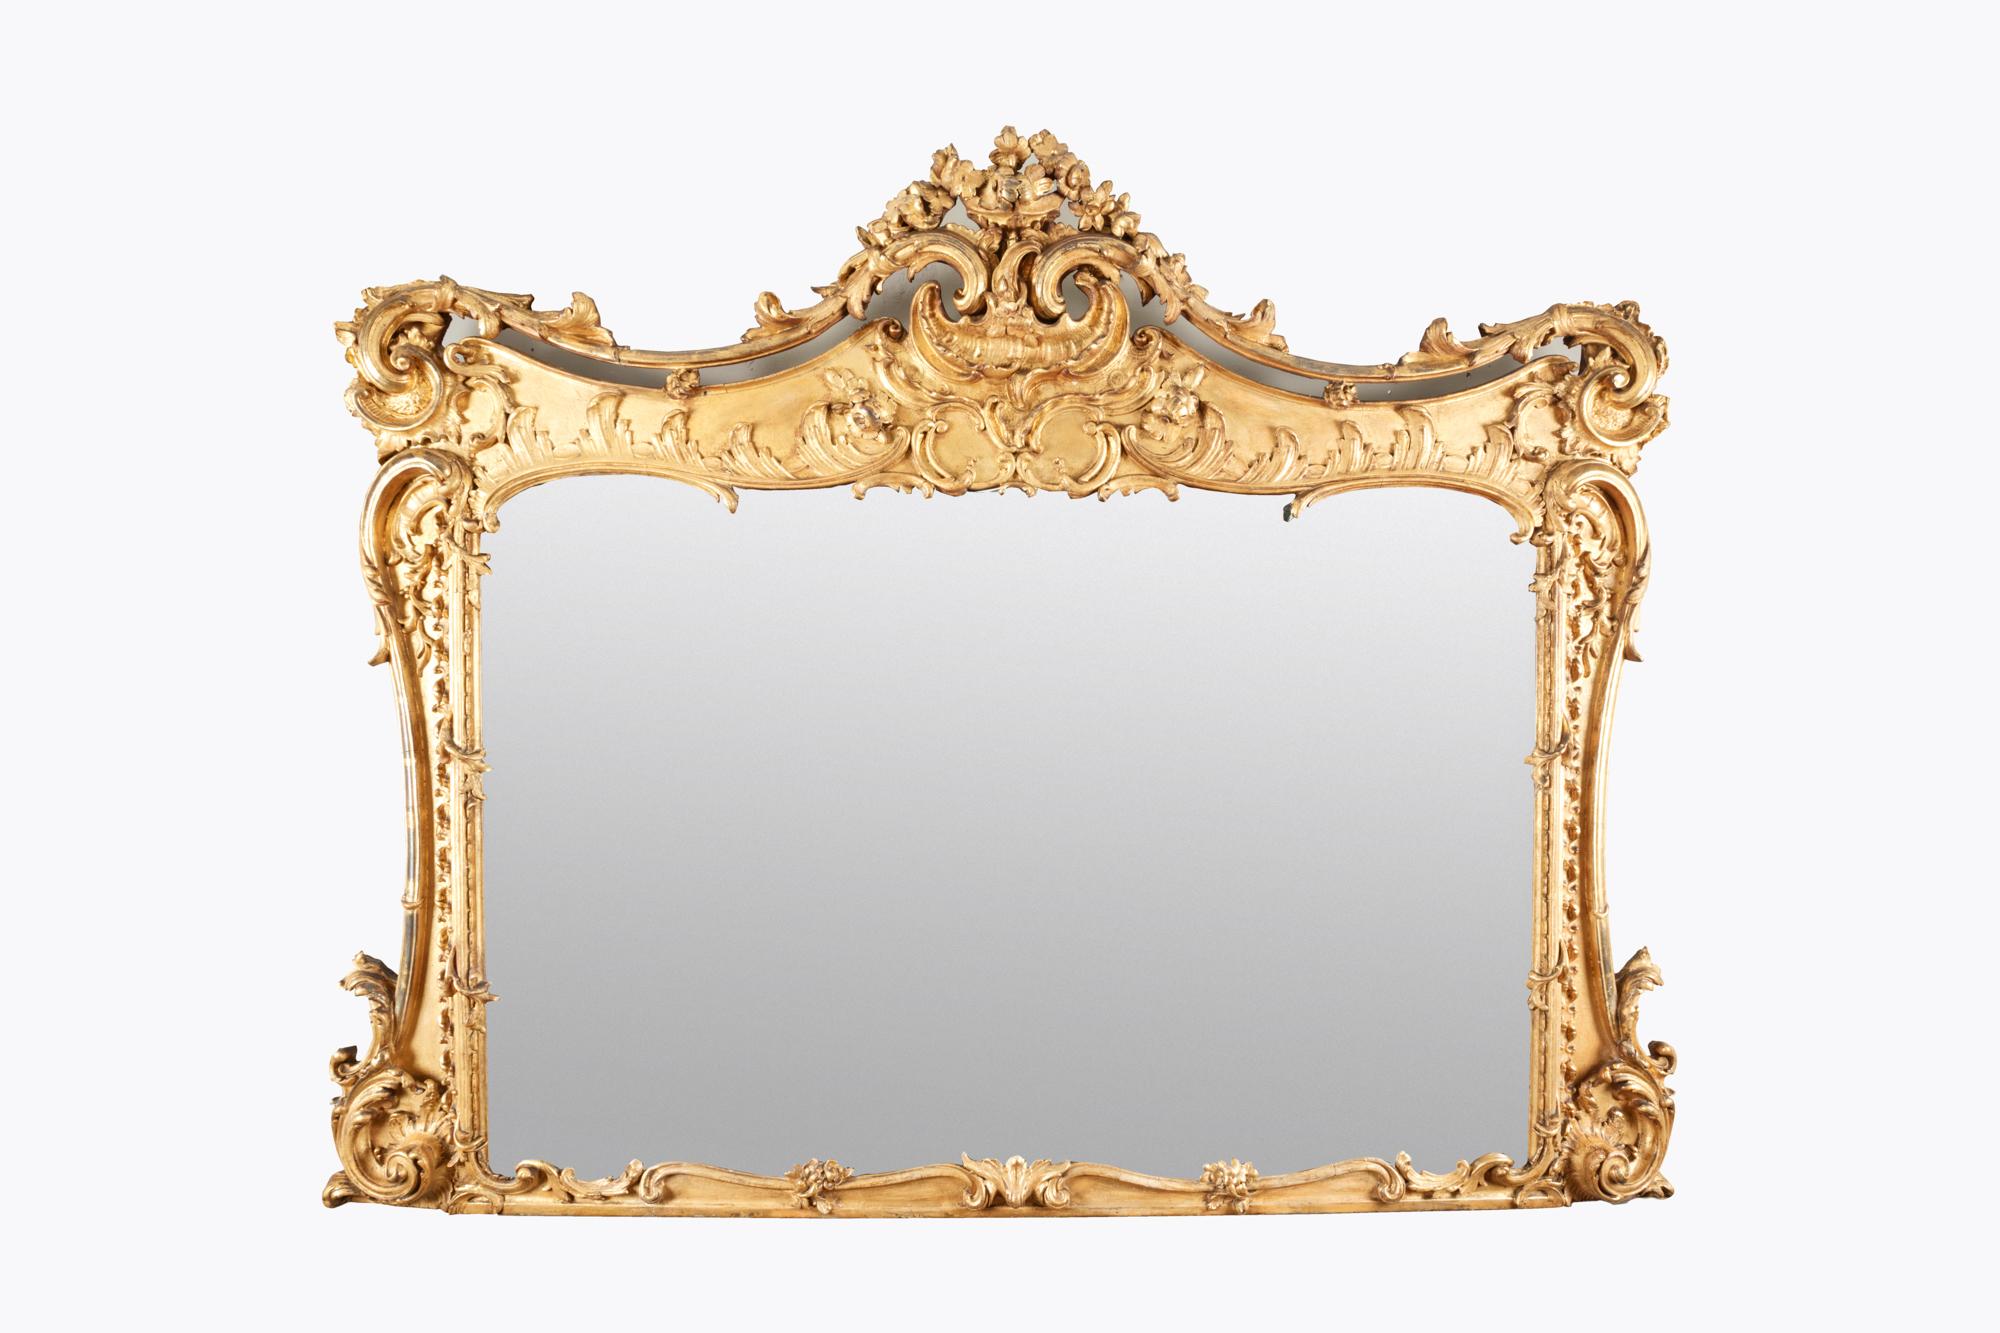 Large 19th century ornate gilt Chippendale-style overmantle mirror. The frame is decorated with foliage, acanthus swags and gadrooned scrolled corners. The detailing of the carving extends to the sides and edges.